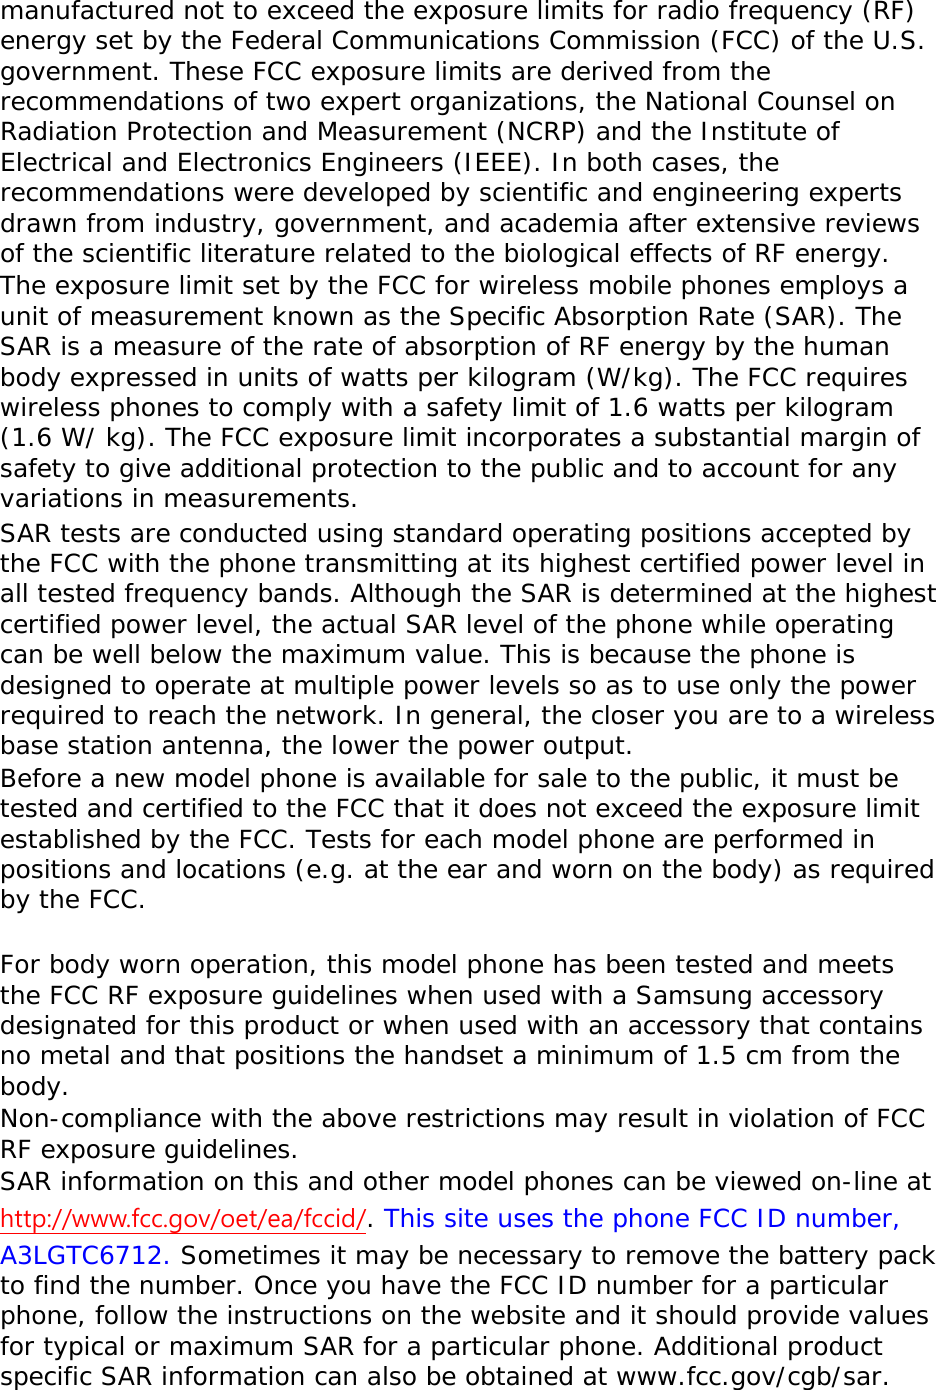 manufactured not to exceed the exposure limits for radio frequency (RF) energy set by the Federal Communications Commission (FCC) of the U.S. government. These FCC exposure limits are derived from the recommendations of two expert organizations, the National Counsel on Radiation Protection and Measurement (NCRP) and the Institute of Electrical and Electronics Engineers (IEEE). In both cases, the recommendations were developed by scientific and engineering experts drawn from industry, government, and academia after extensive reviews of the scientific literature related to the biological effects of RF energy. The exposure limit set by the FCC for wireless mobile phones employs a unit of measurement known as the Specific Absorption Rate (SAR). The SAR is a measure of the rate of absorption of RF energy by the human body expressed in units of watts per kilogram (W/kg). The FCC requires wireless phones to comply with a safety limit of 1.6 watts per kilogram (1.6 W/ kg). The FCC exposure limit incorporates a substantial margin of safety to give additional protection to the public and to account for any variations in measurements. SAR tests are conducted using standard operating positions accepted by the FCC with the phone transmitting at its highest certified power level in all tested frequency bands. Although the SAR is determined at the highest certified power level, the actual SAR level of the phone while operating can be well below the maximum value. This is because the phone is designed to operate at multiple power levels so as to use only the power required to reach the network. In general, the closer you are to a wireless base station antenna, the lower the power output. Before a new model phone is available for sale to the public, it must be tested and certified to the FCC that it does not exceed the exposure limit established by the FCC. Tests for each model phone are performed in positions and locations (e.g. at the ear and worn on the body) as required by the FCC.    For body worn operation, this model phone has been tested and meets the FCC RF exposure guidelines when used with a Samsung accessory designated for this product or when used with an accessory that contains no metal and that positions the handset a minimum of 1.5 cm from the body.  Non-compliance with the above restrictions may result in violation of FCC RF exposure guidelines. SAR information on this and other model phones can be viewed on-line at http://www.fcc.gov/oet/ea/fccid/. This site uses the phone FCC ID number, A3LGTC6712. Sometimes it may be necessary to remove the battery pack to find the number. Once you have the FCC ID number for a particular phone, follow the instructions on the website and it should provide values for typical or maximum SAR for a particular phone. Additional product specific SAR information can also be obtained at www.fcc.gov/cgb/sar. 